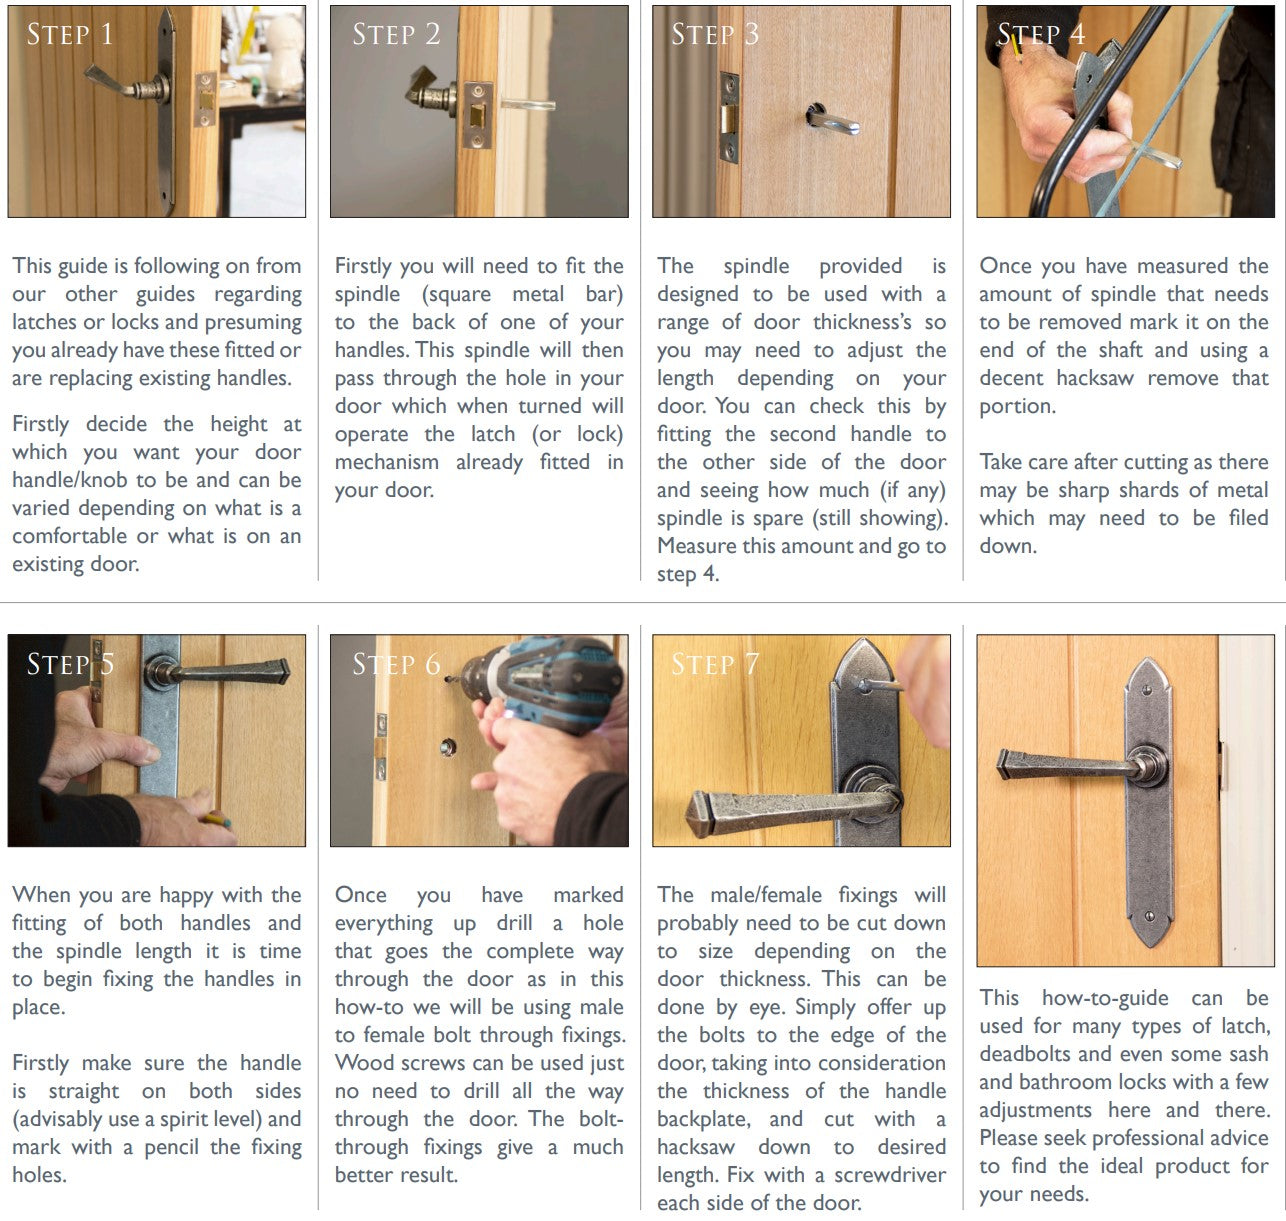 A step by step guide on how to fit lever handles to a wooden door.